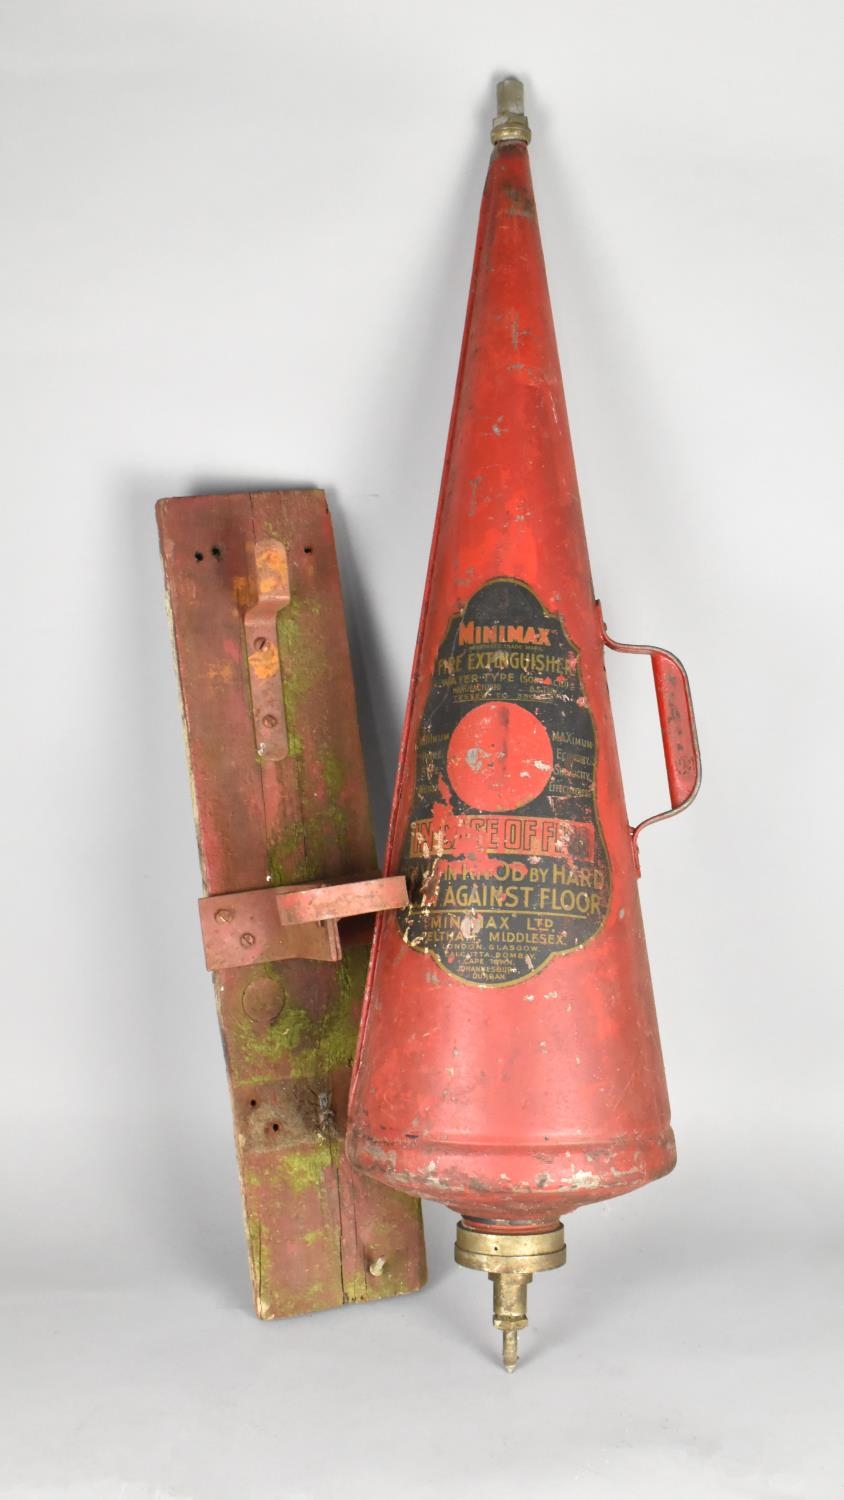 A Vintage Minimax Fire Extinguisher with Wall Mount Fitting